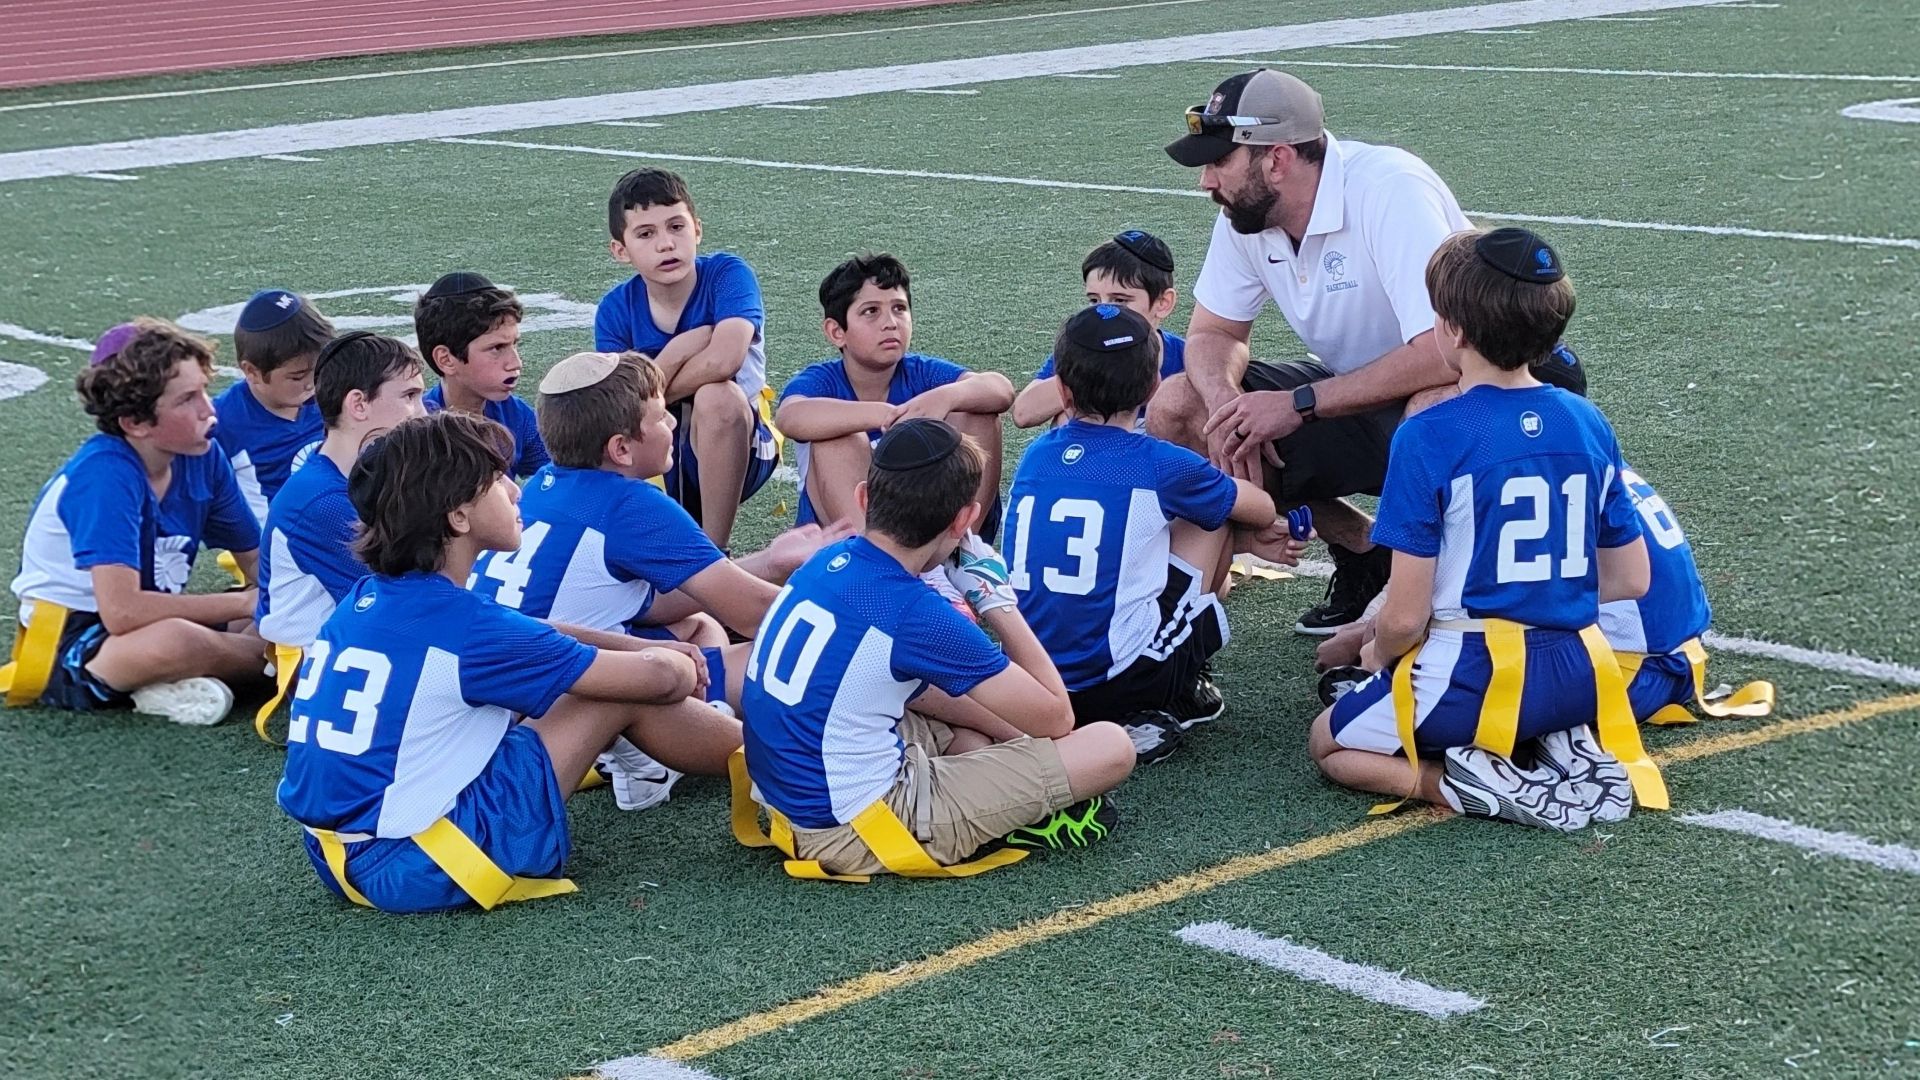 A group of young boys are sitting in a circle on a football field while a coach talks to them